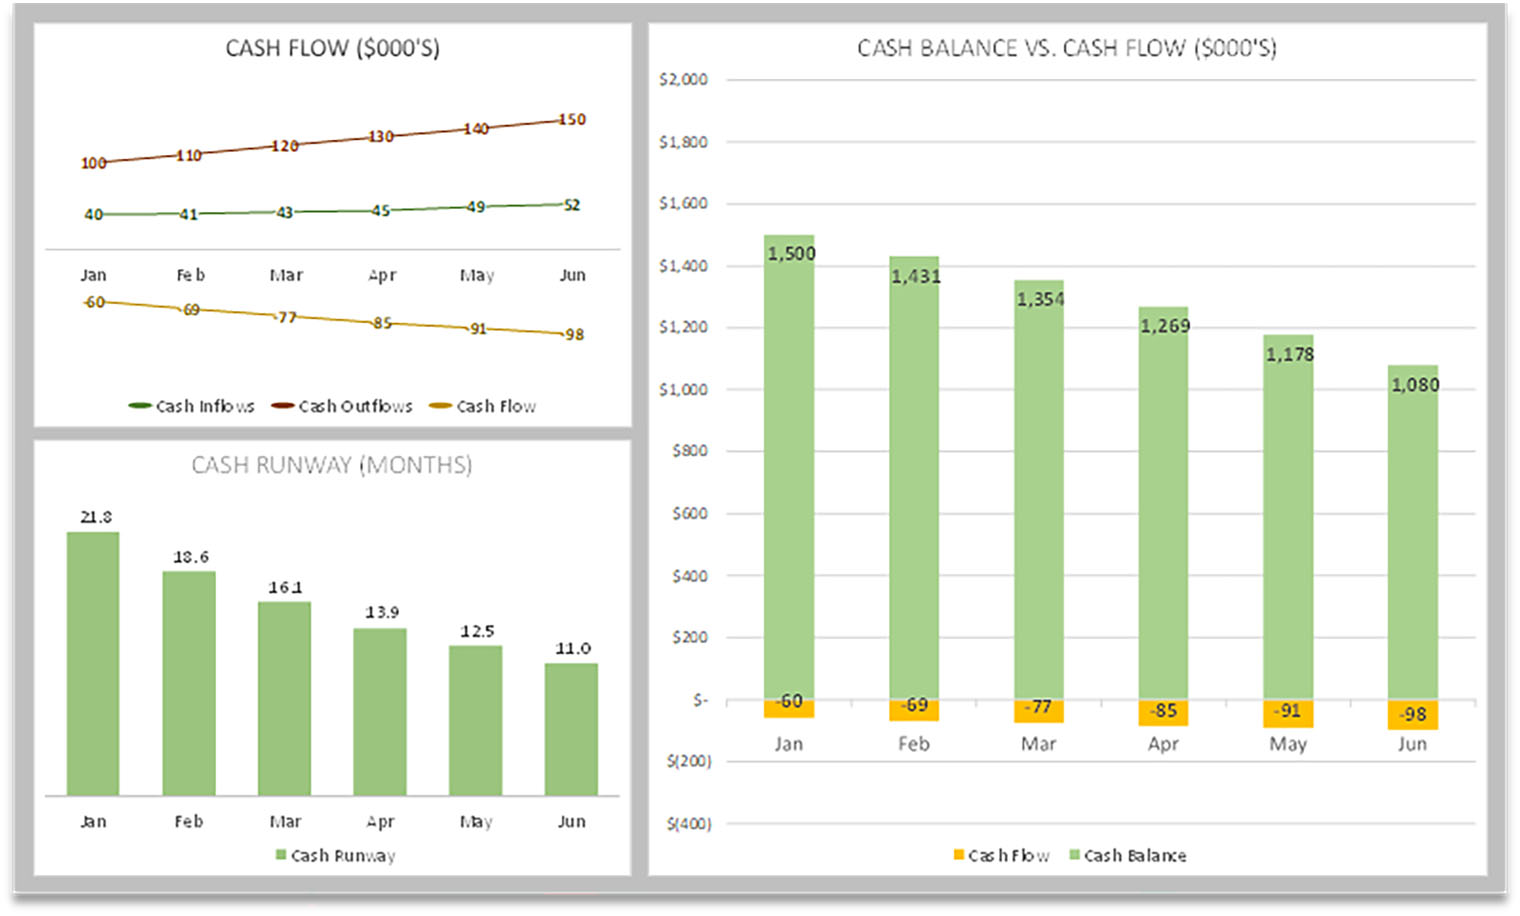 How Using SaaS Metrics Leads to Better Cash Flow Understanding and Performance Dashboard